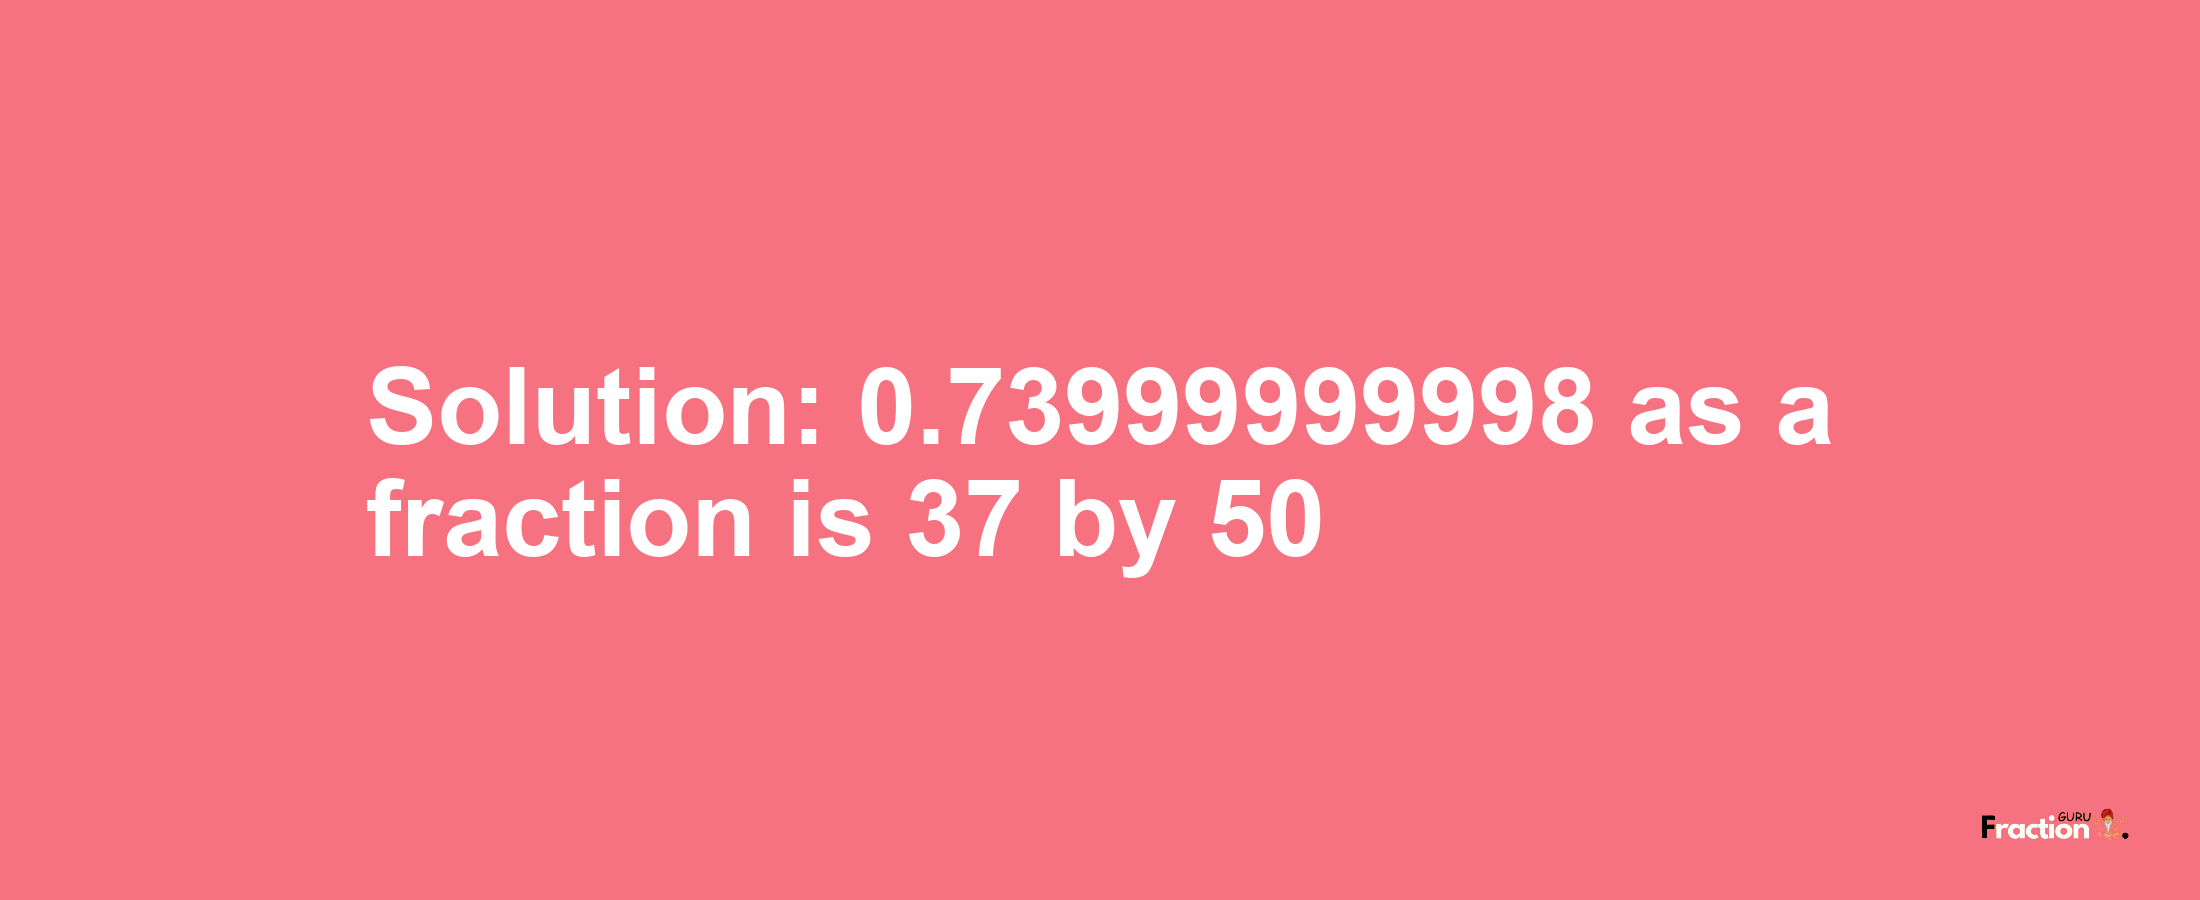 Solution:0.73999999998 as a fraction is 37/50